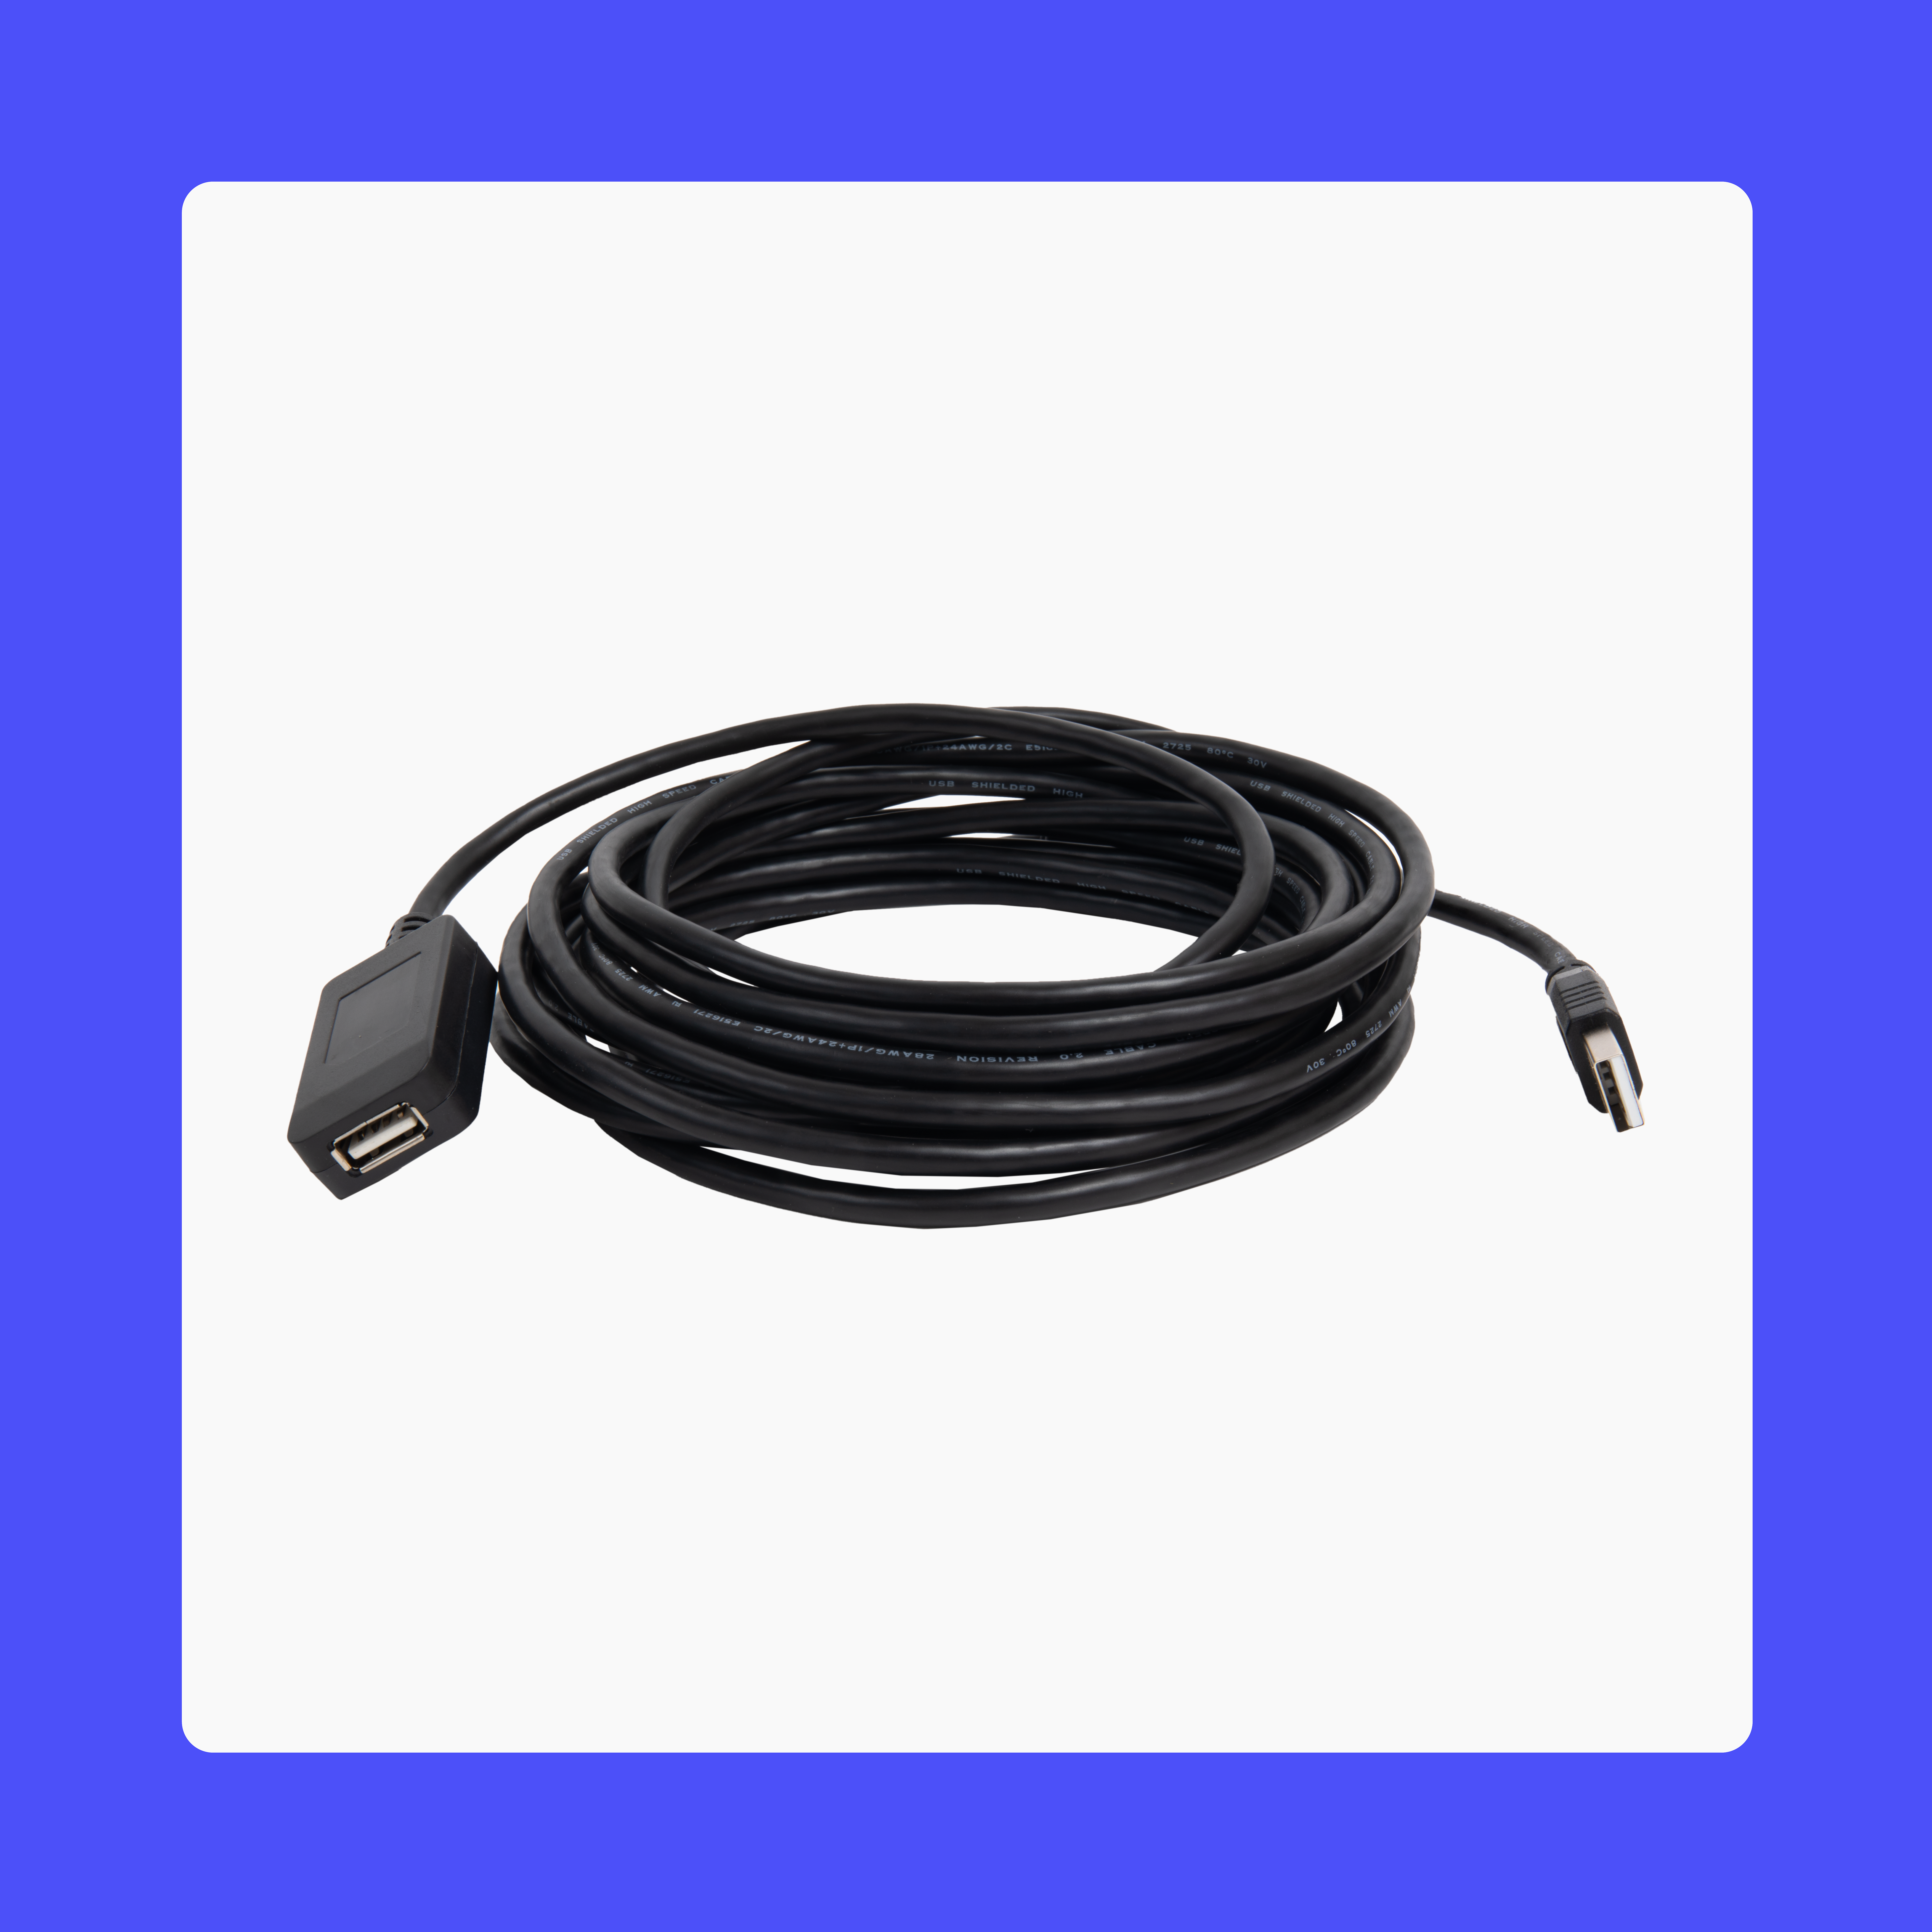 Telephone Extension Cable Fully Wired 4 Pin Lead Phone 5m 